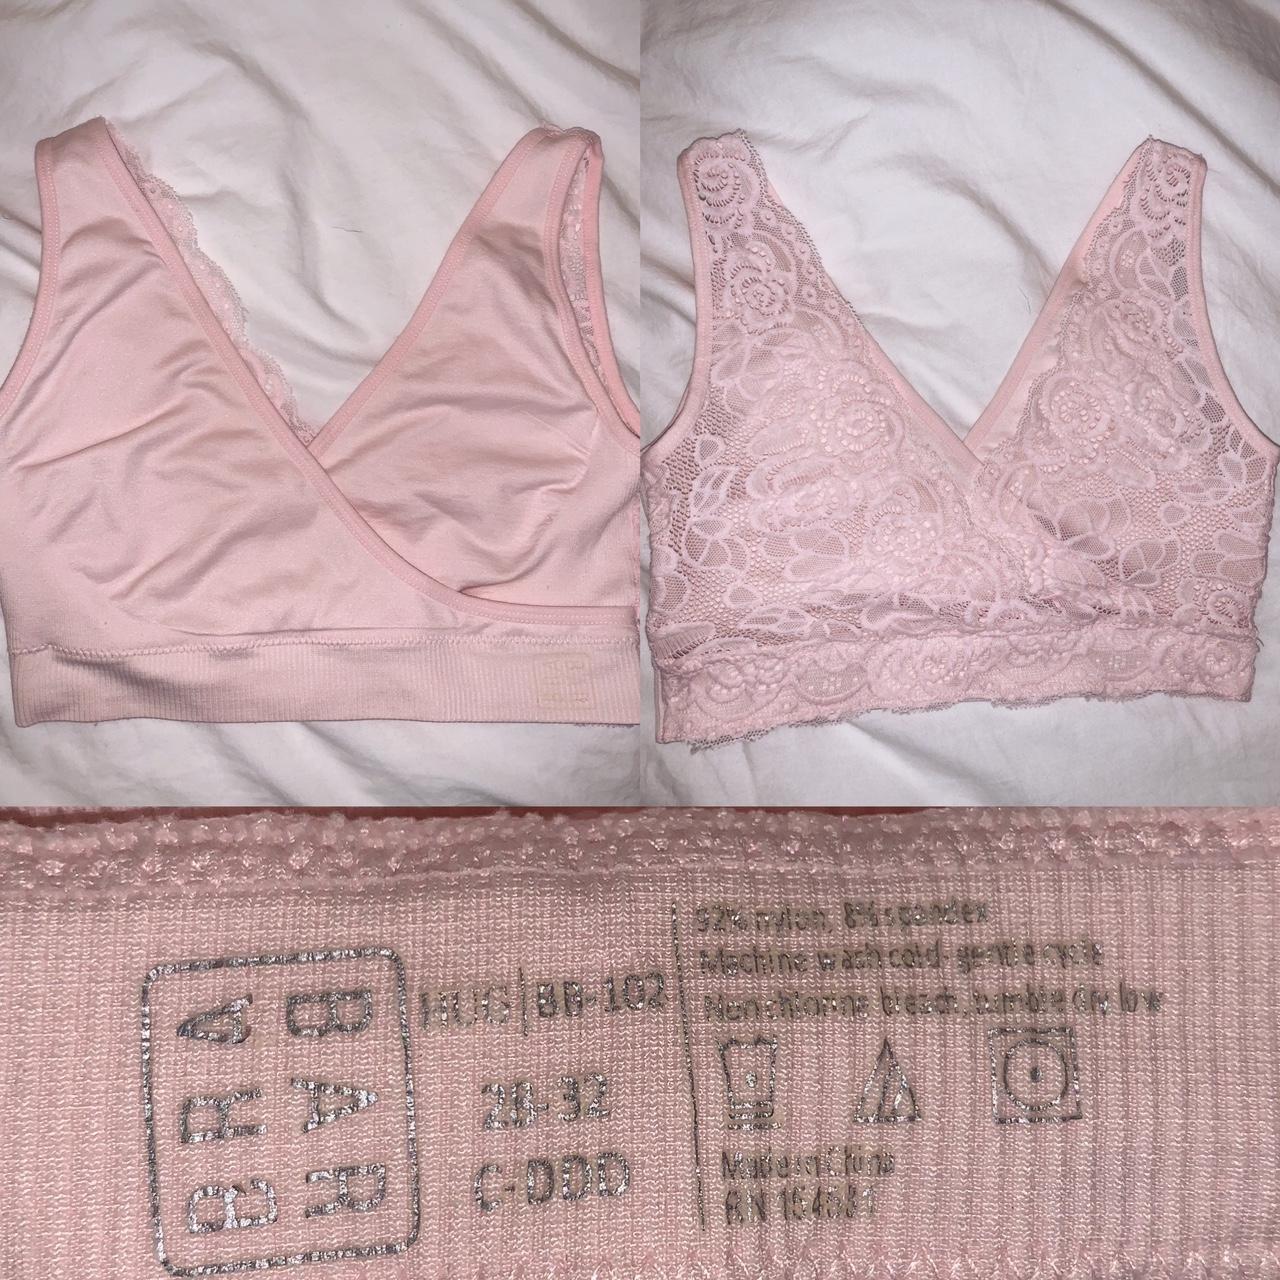 Product Image 1 - light pink bralette

new

fits size xs/s

I’m